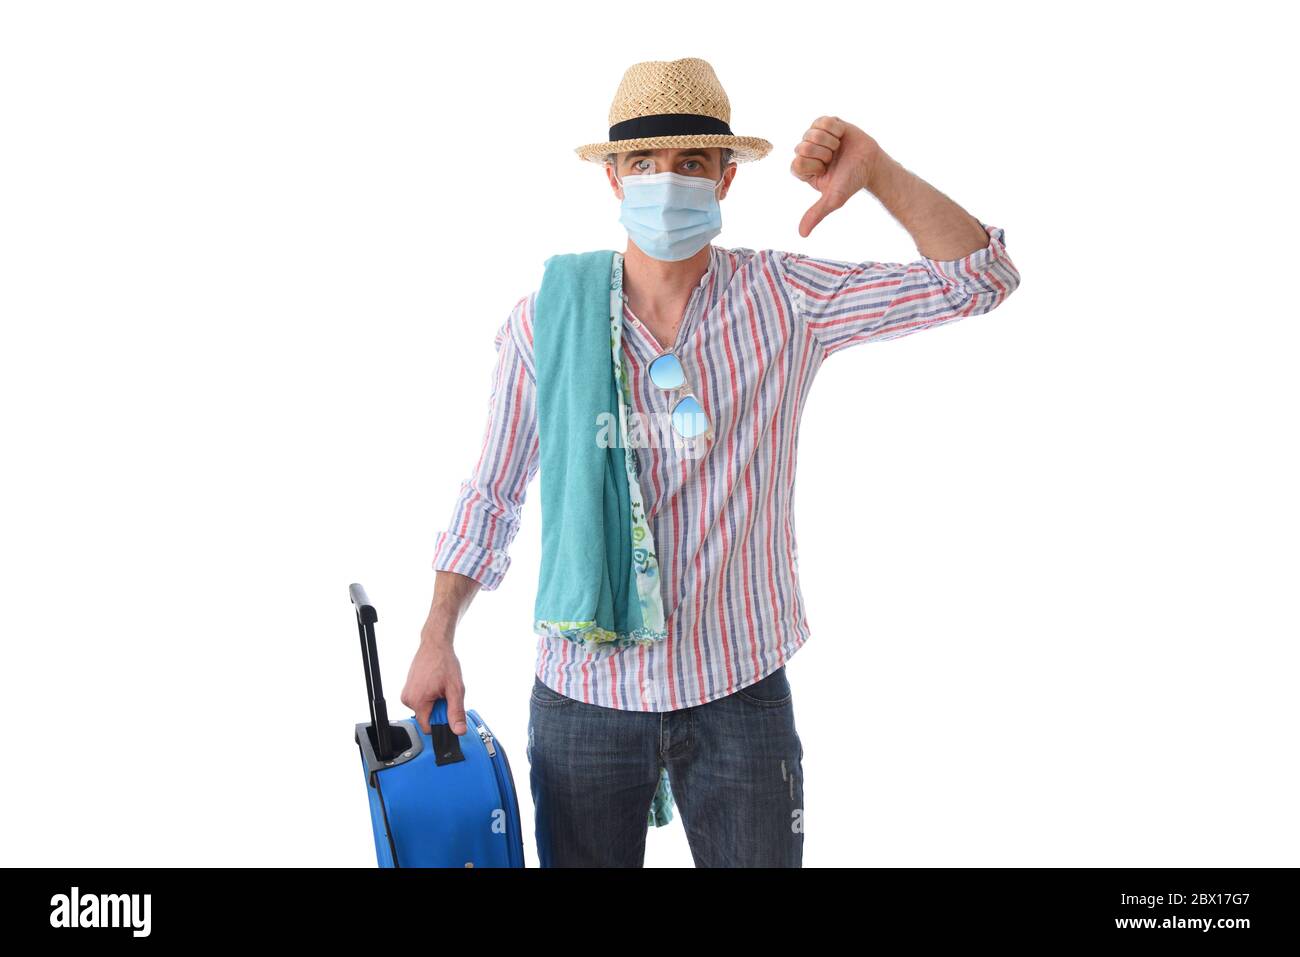 Man prepared for vacation with thumb down protected with face mask, straw hat, towel, glasses and suitcase in hand isolated with white background Stock Photo